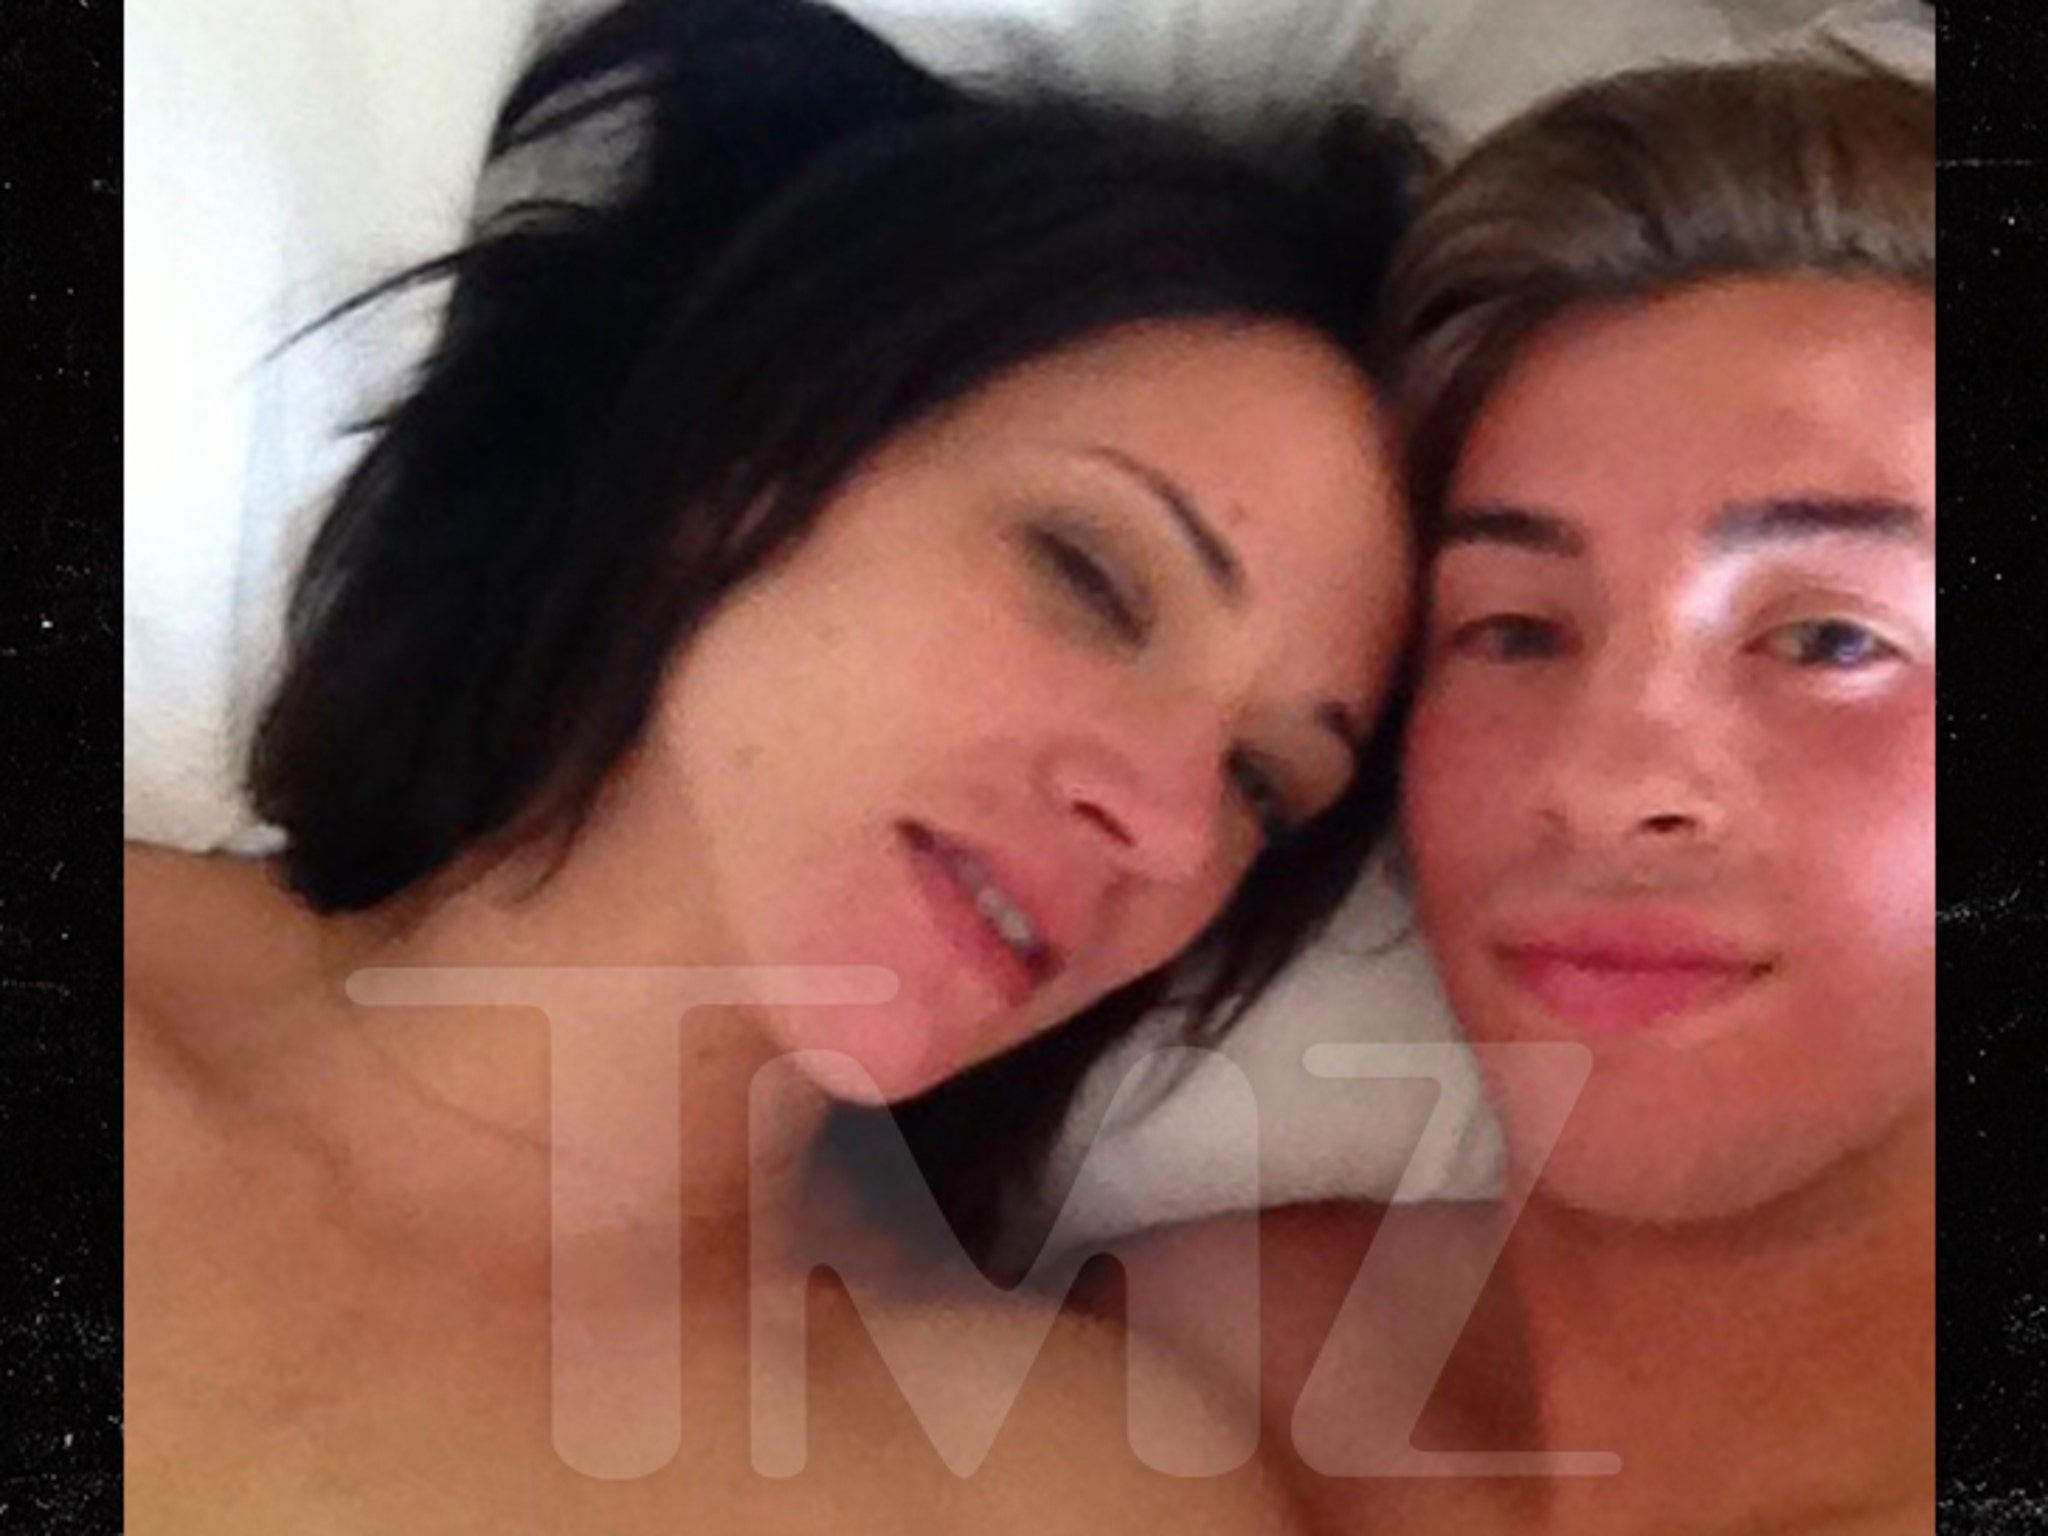 Asian Milf Forced By Boy Video - Asia Argento and 17-Year-Old Boy in Bed in Sexual Encounter